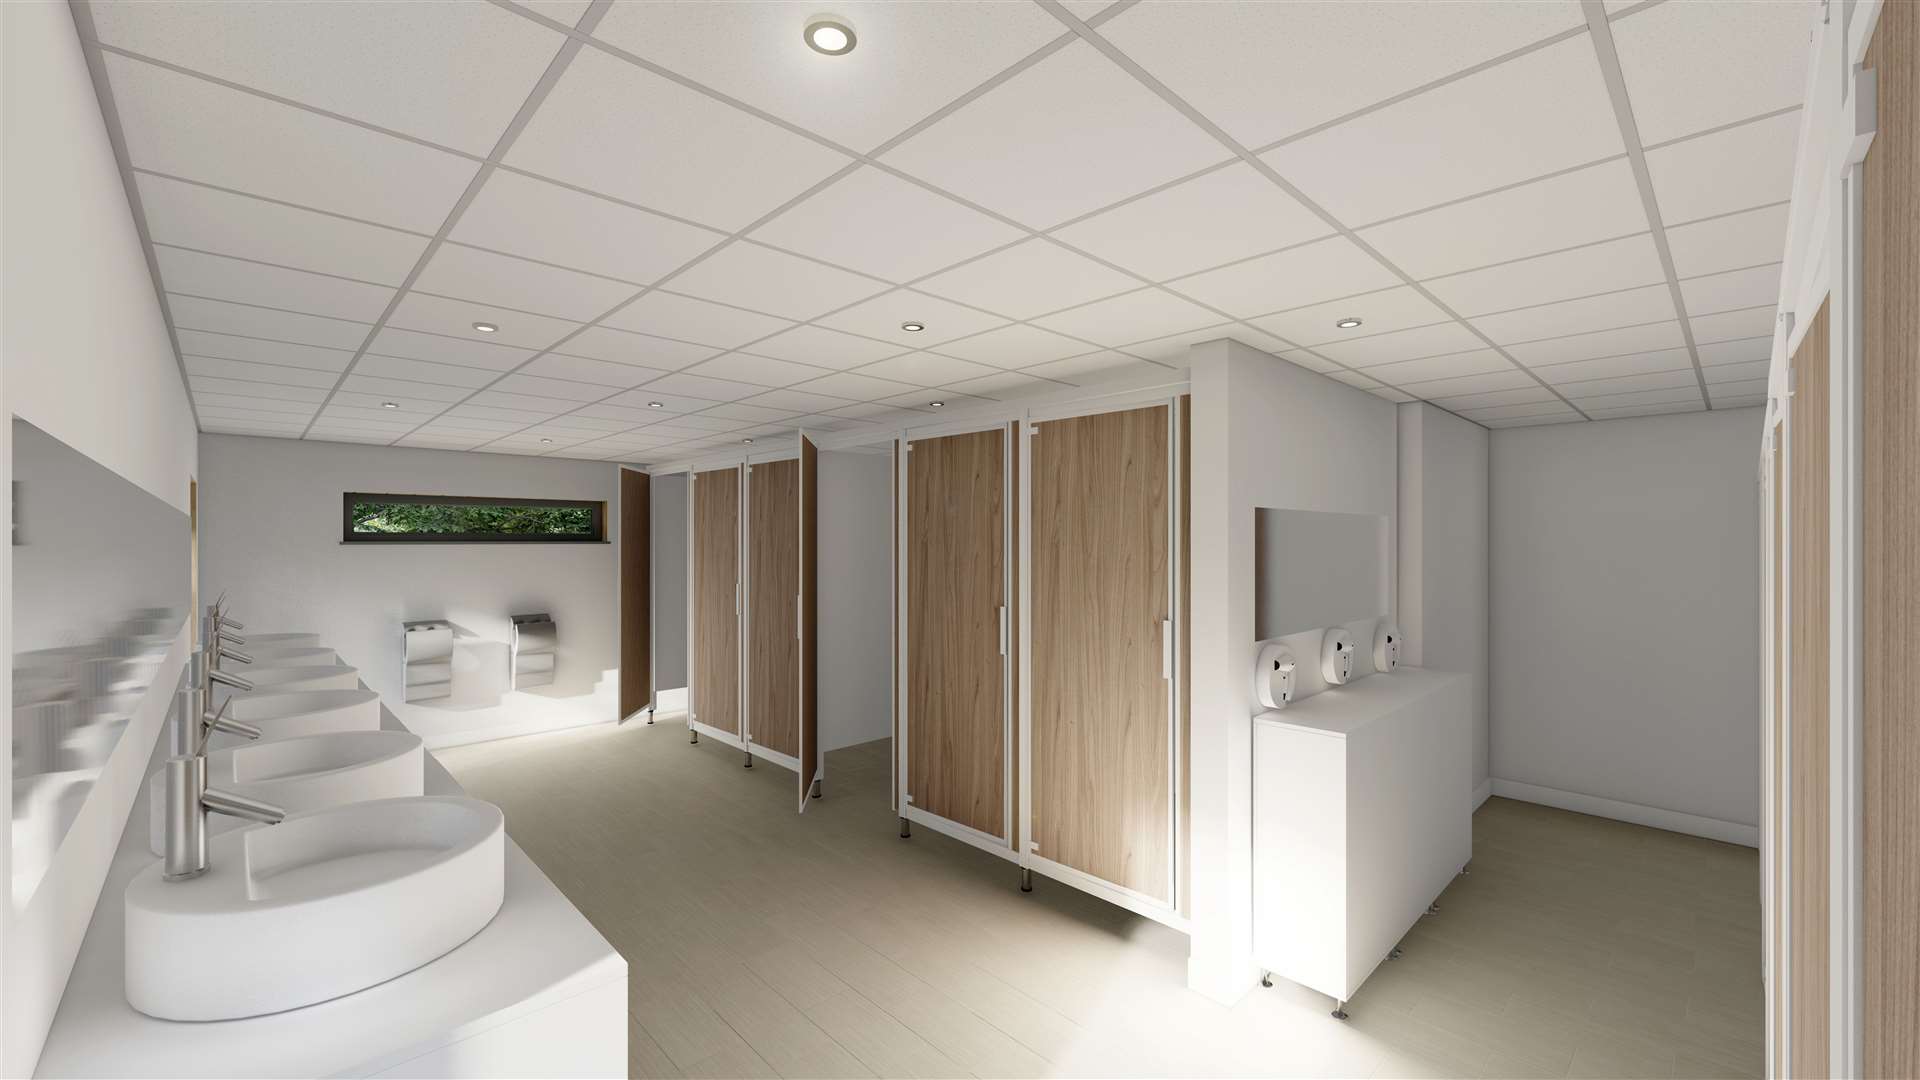 How the interior of the new facilities block will look when complete. Image: 3D Drawing Office